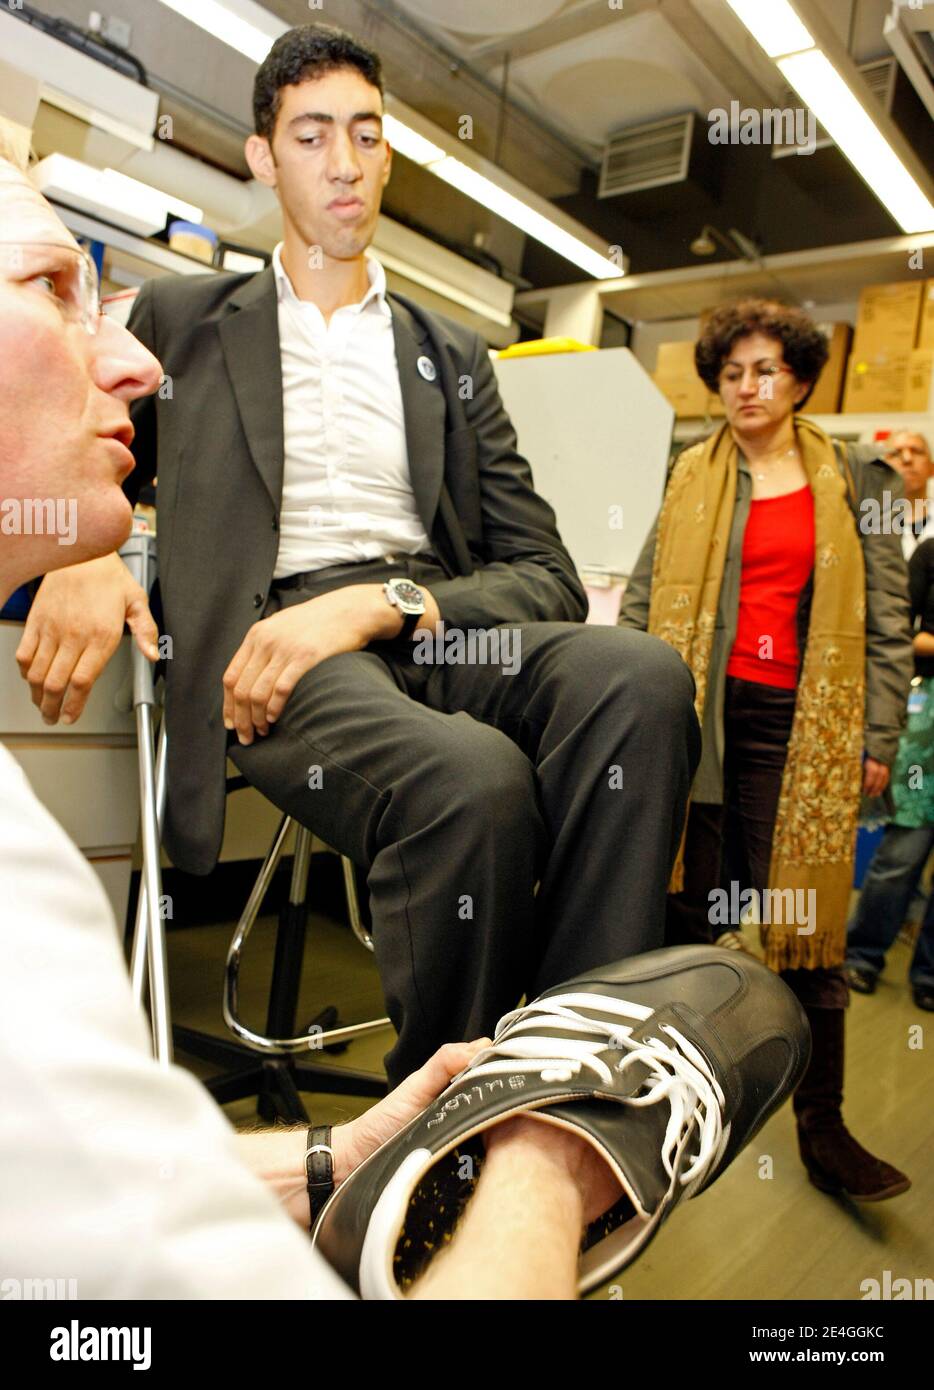 EXCLUSIVE. Turk Sultan Kosen, who is the current record holder of the  tallest living man in the world as recognised by Guinness World Records,  tries on made-to-measure shoes at Erasmus MC hospital